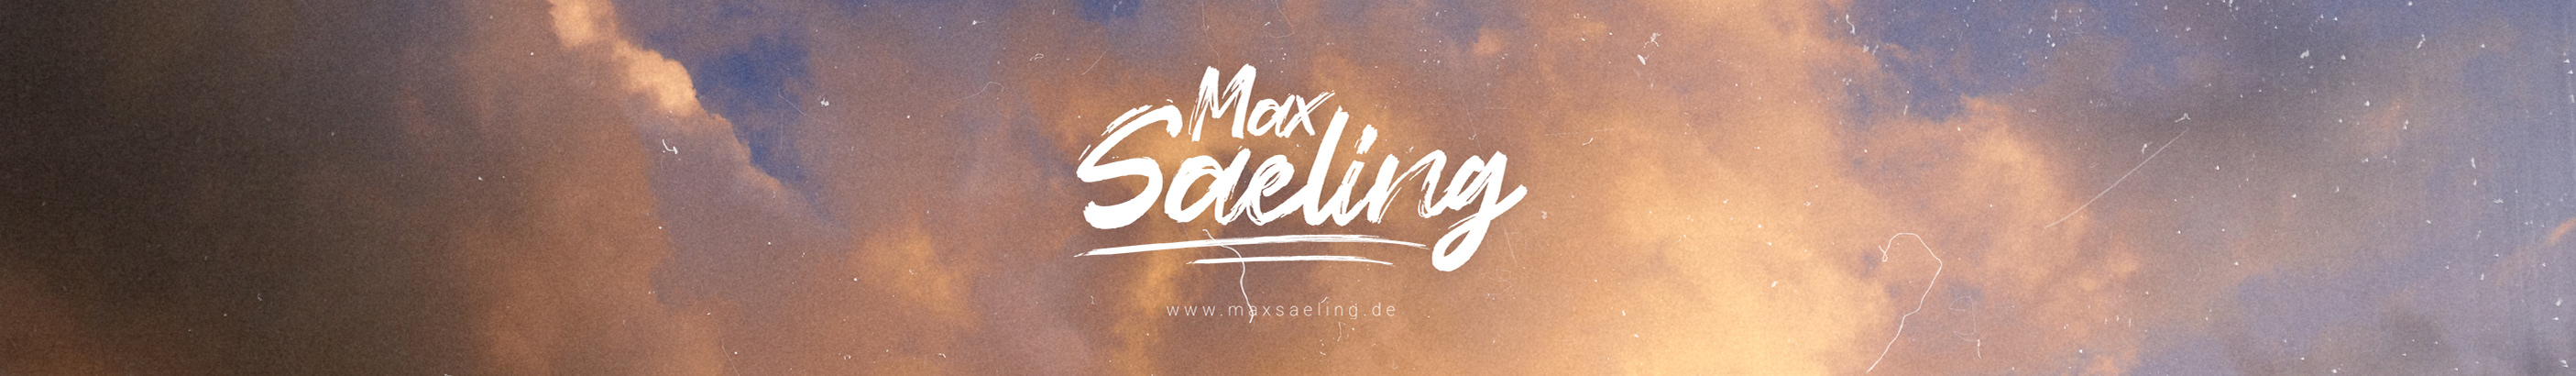 Max Saeling's profile banner